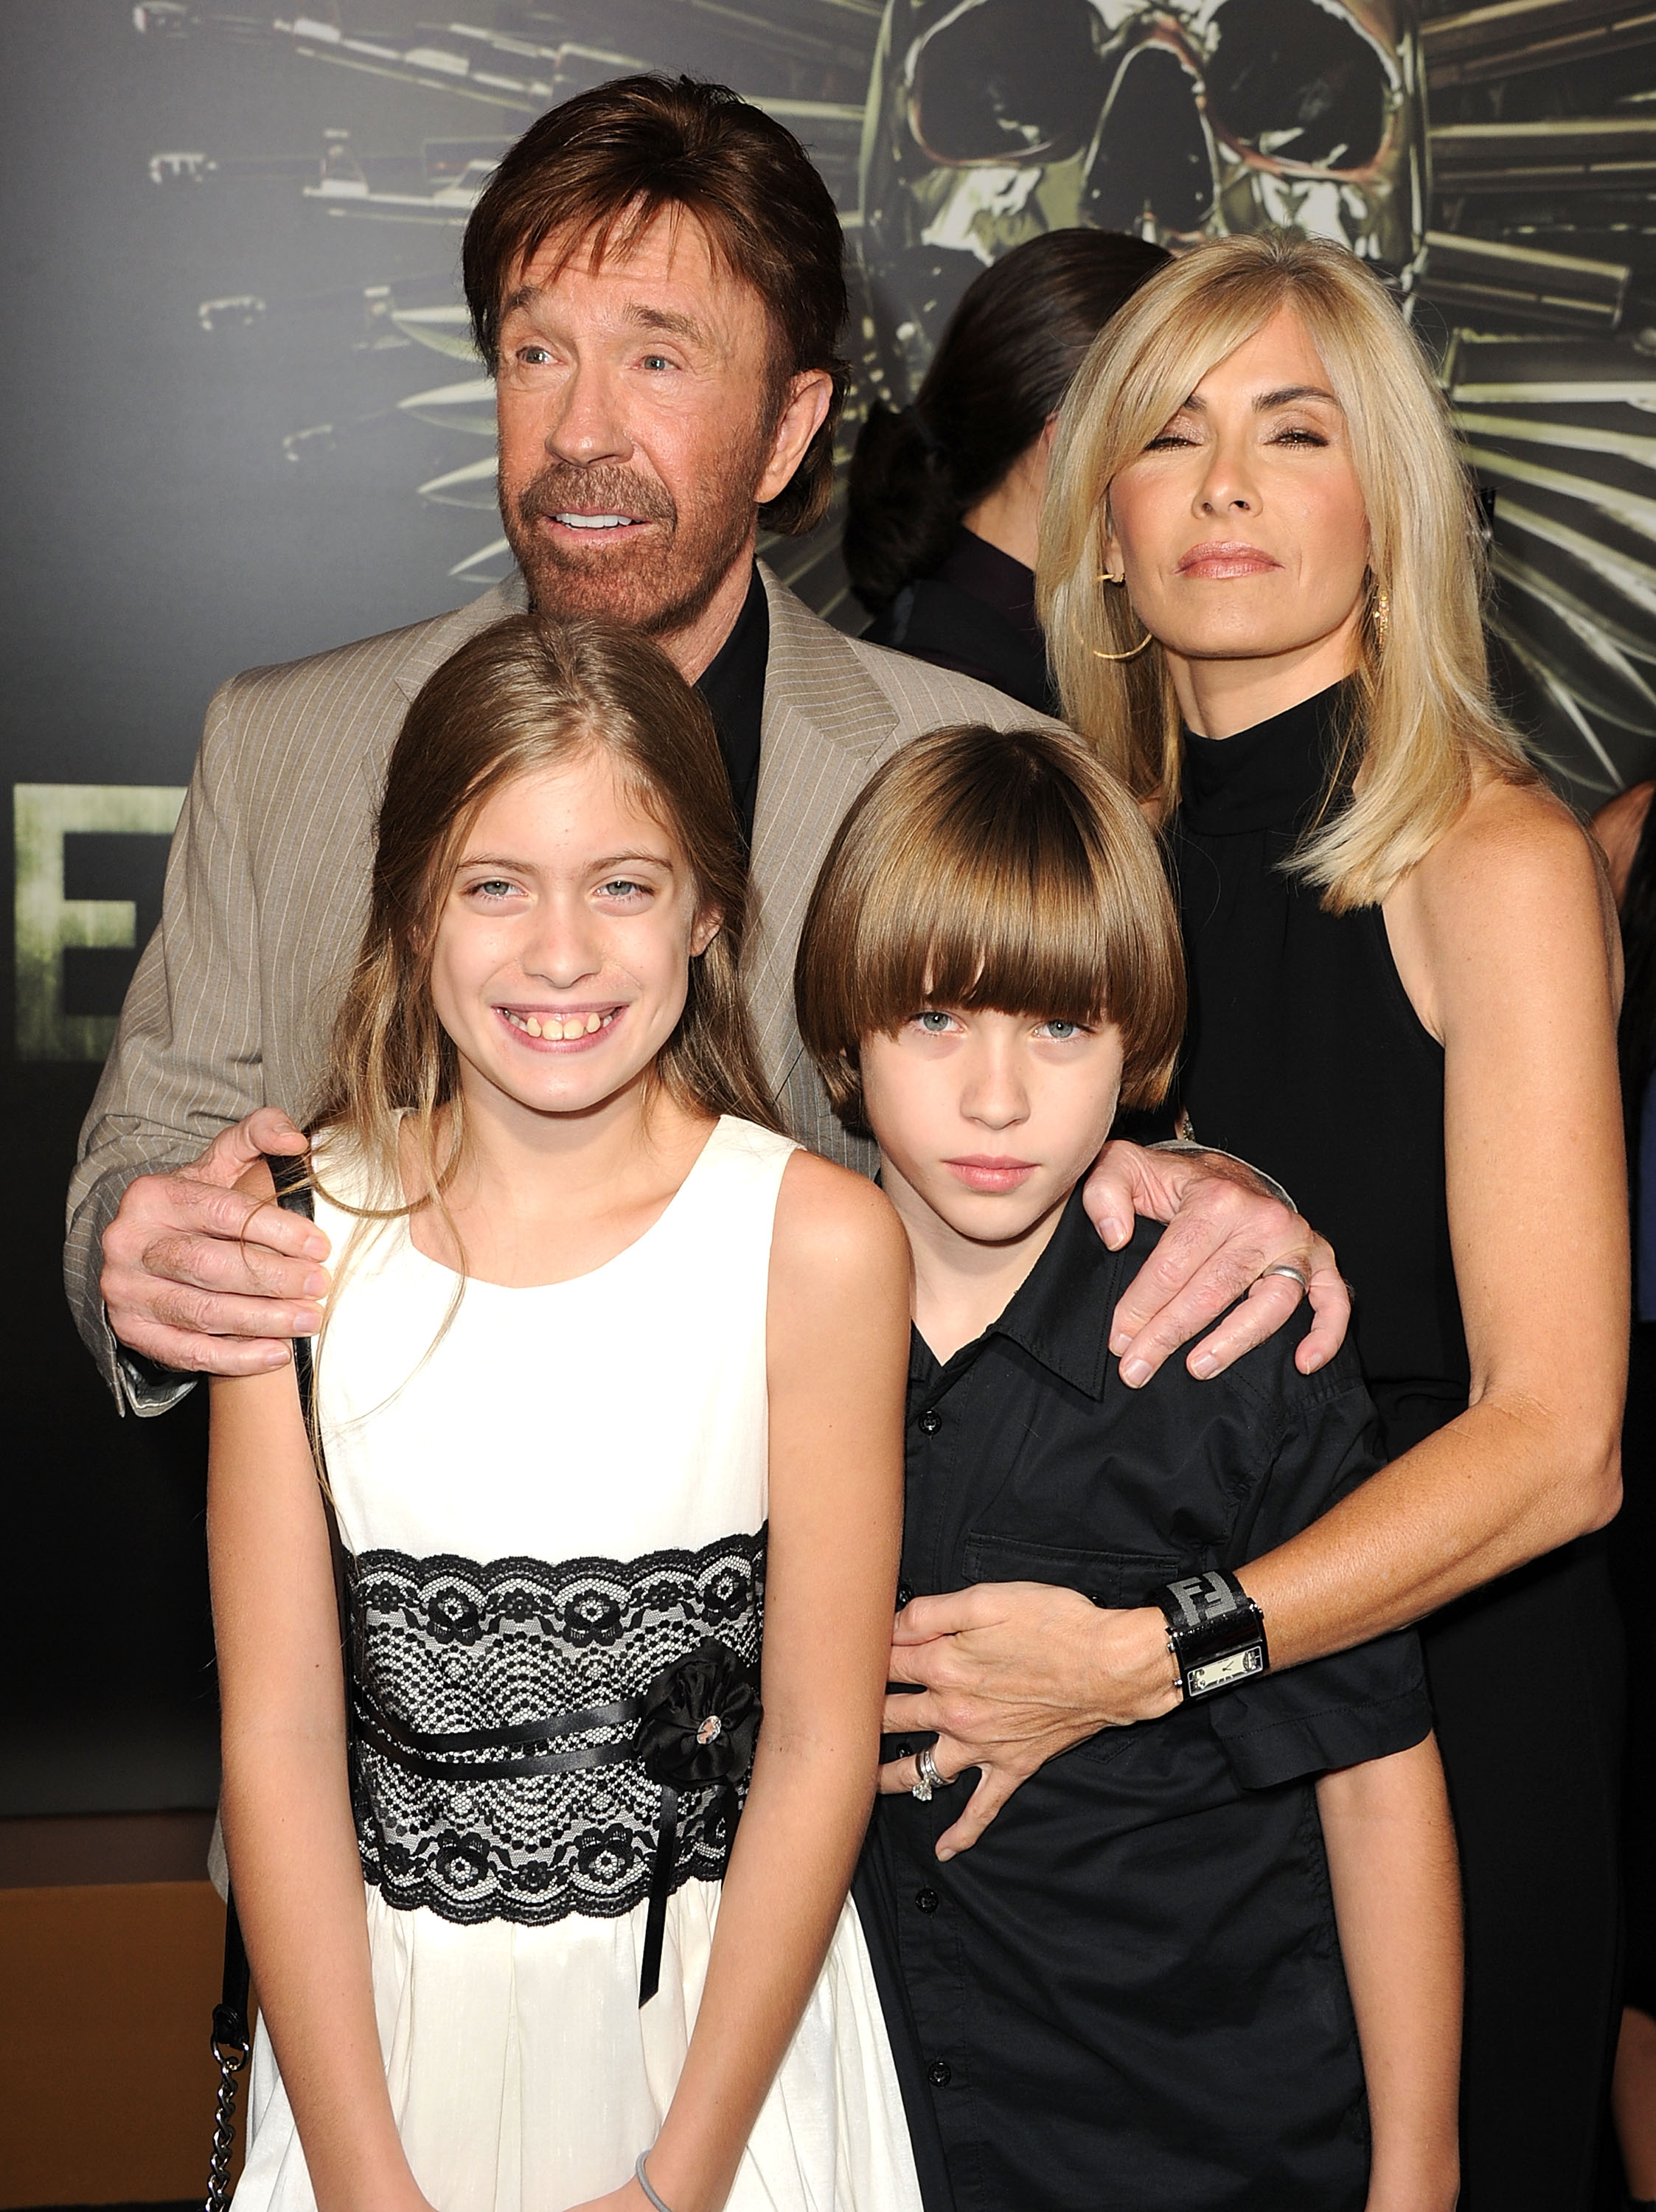 Chuck Norris, Gena O'Kelly, and their twin children Dakota and Danilee arrive at the "The Expendables 2" Los Angeles Premiere at Grauman's Chinese Theatre on August 15, 2012, in Hollywood, California. | Source: Getty Images